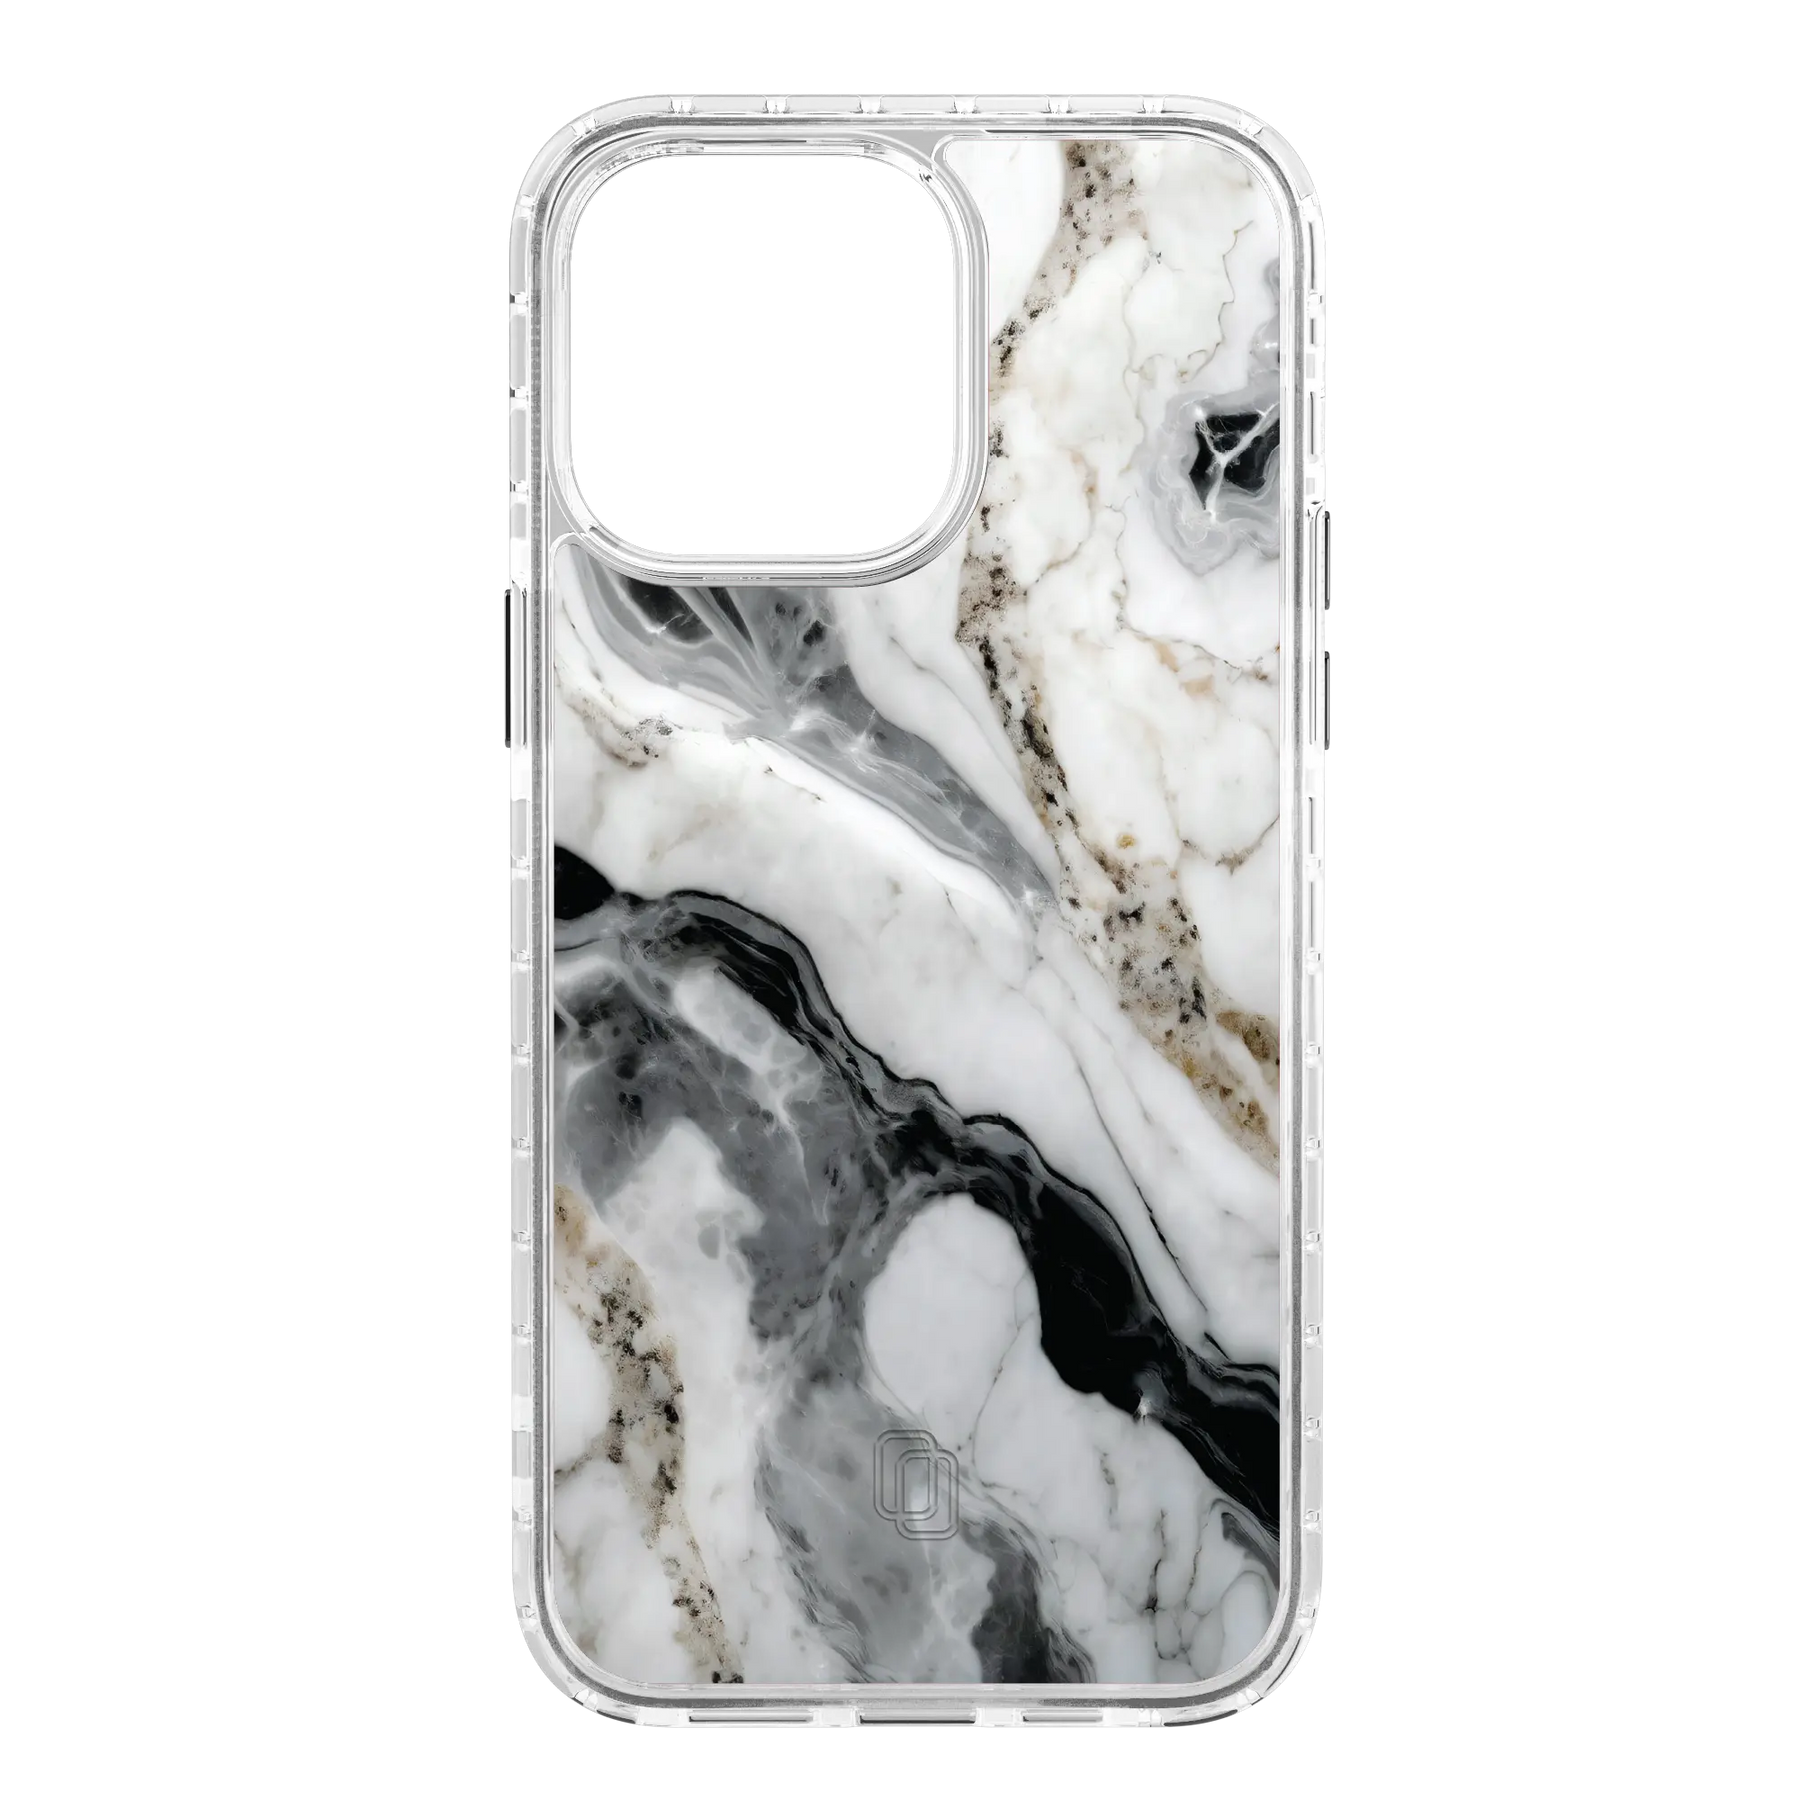 Apple-iPhone-14-Pro-Max-Crystal-Clear Pure Snow | Protective MagSafe White Marble Case | Marble Stone Collection for Apple iPhone 14 Series cellhelmet cellhelmet